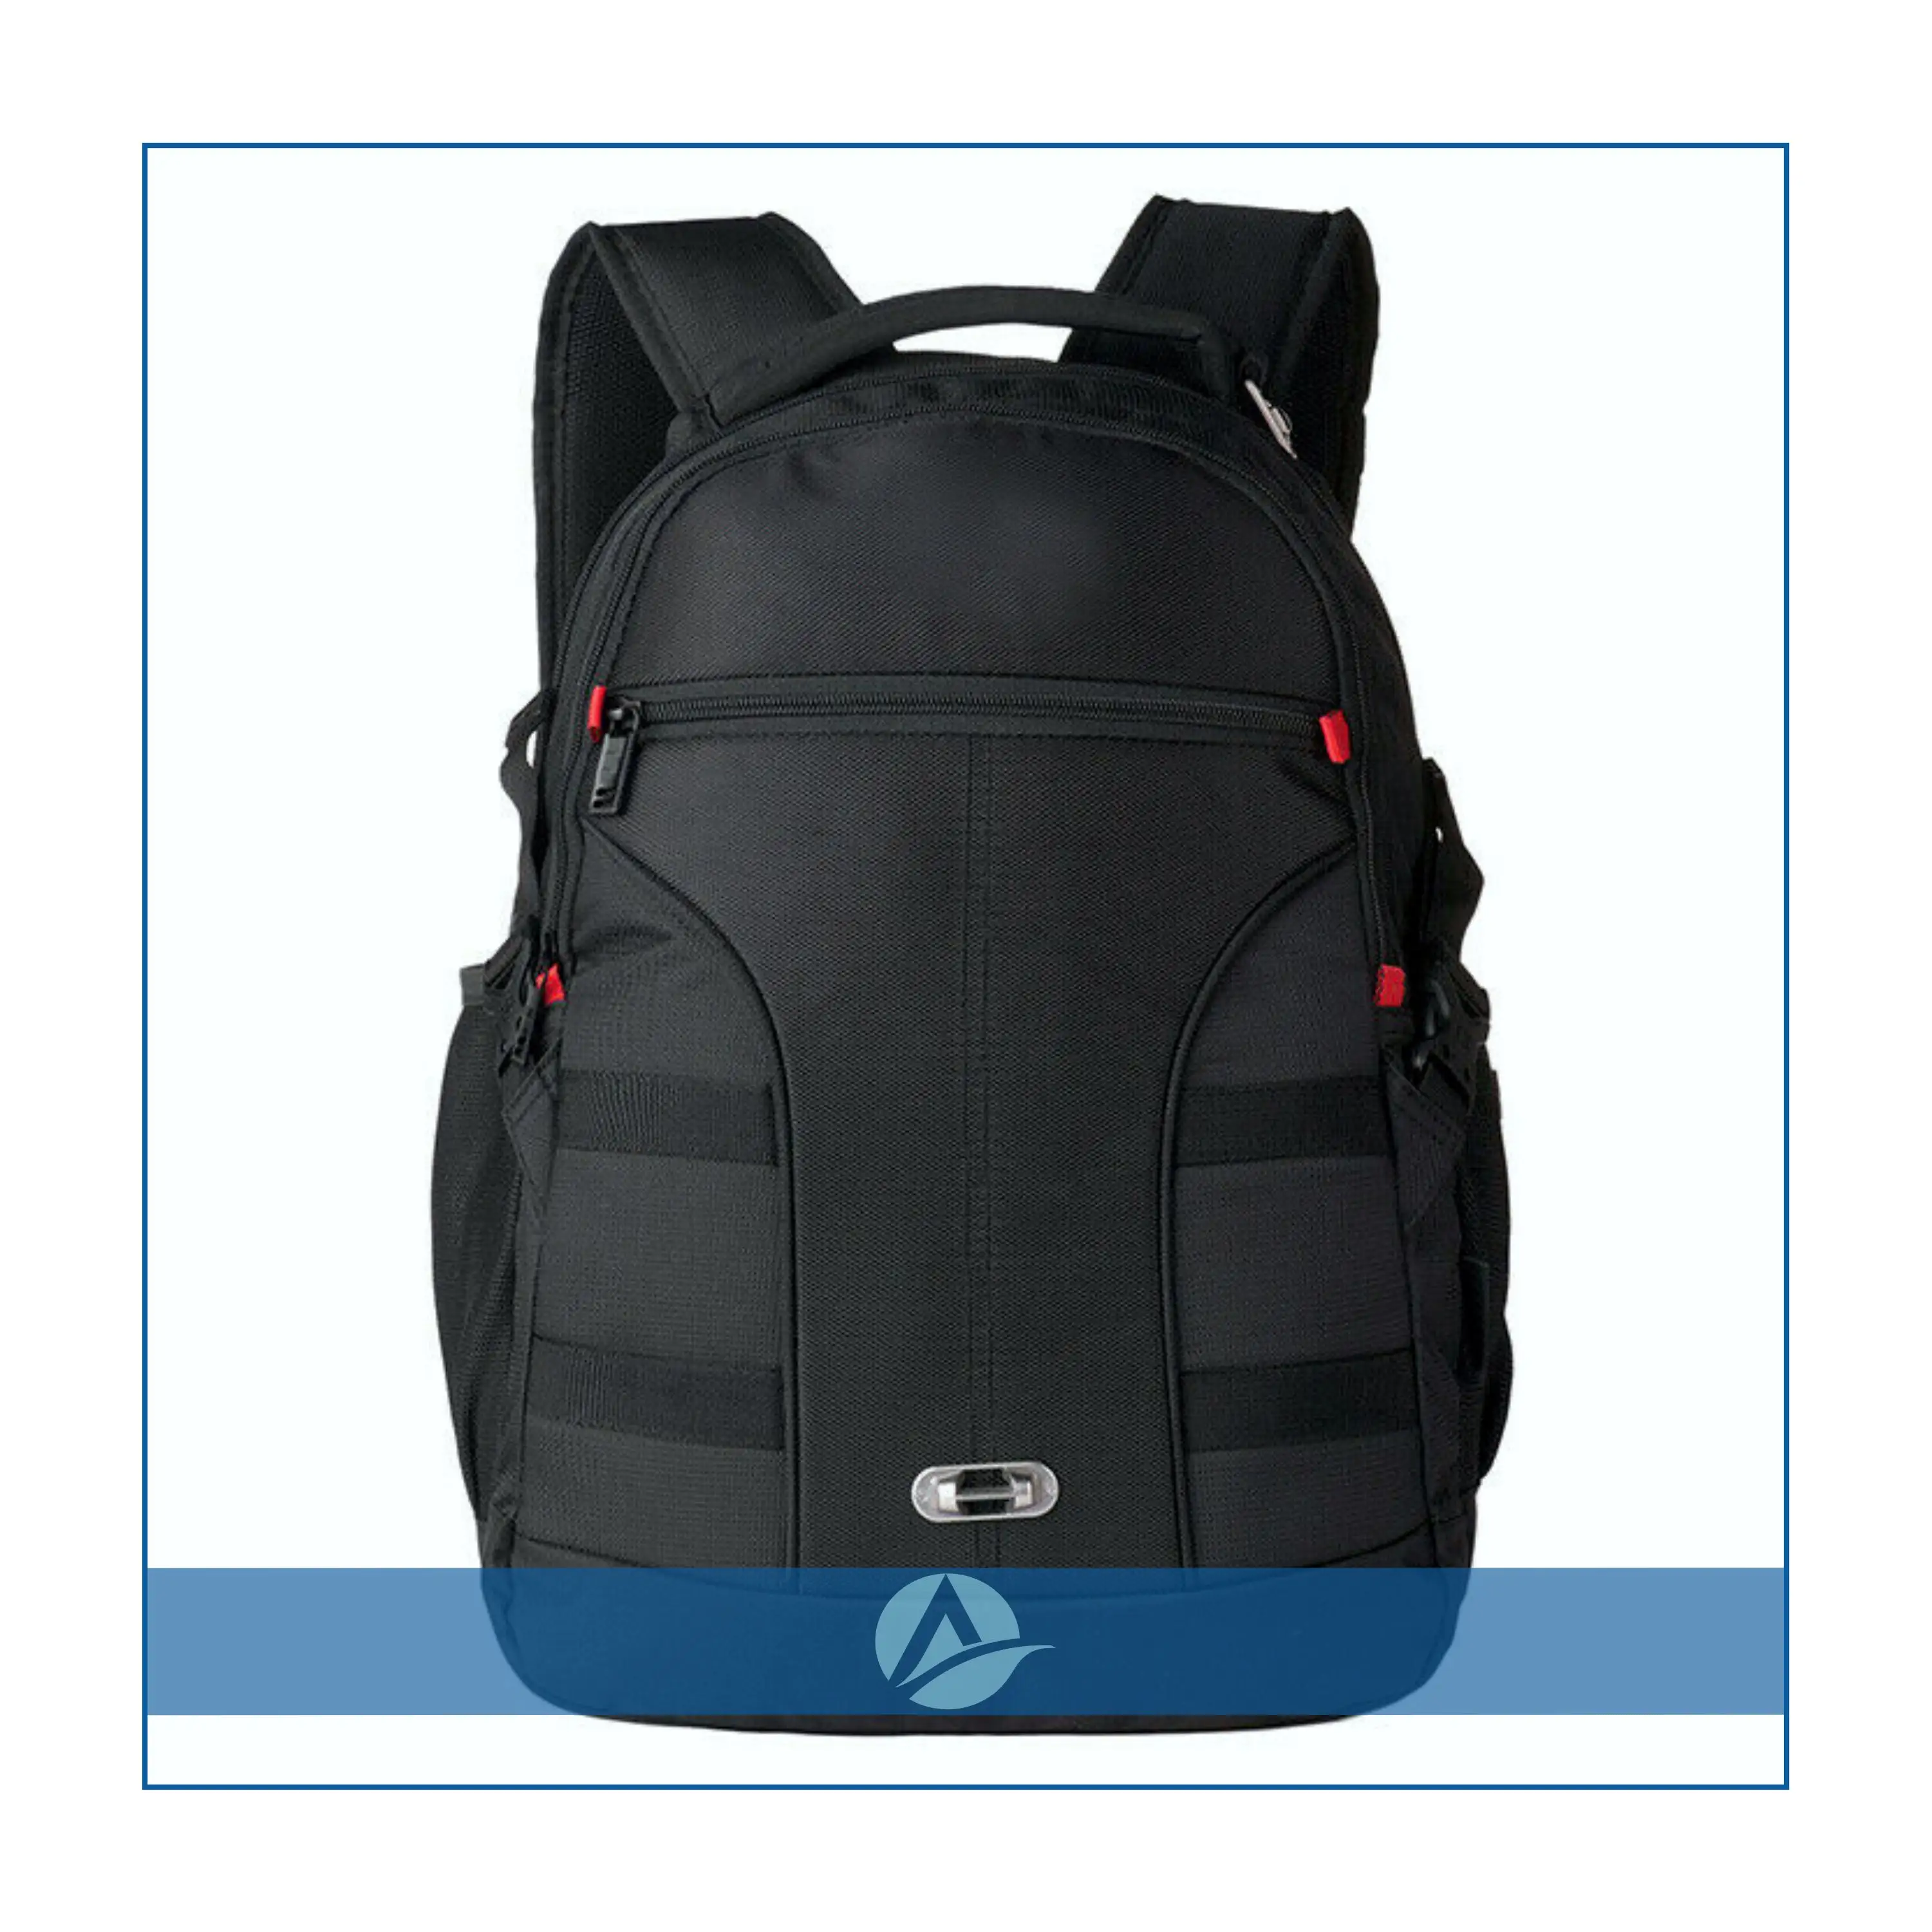 Customize Logo Backpacks With Adjustable Buckle Skid-proof Zipper Breathing Hole To Keep Good Shape Of The Bag Backpack Laptop